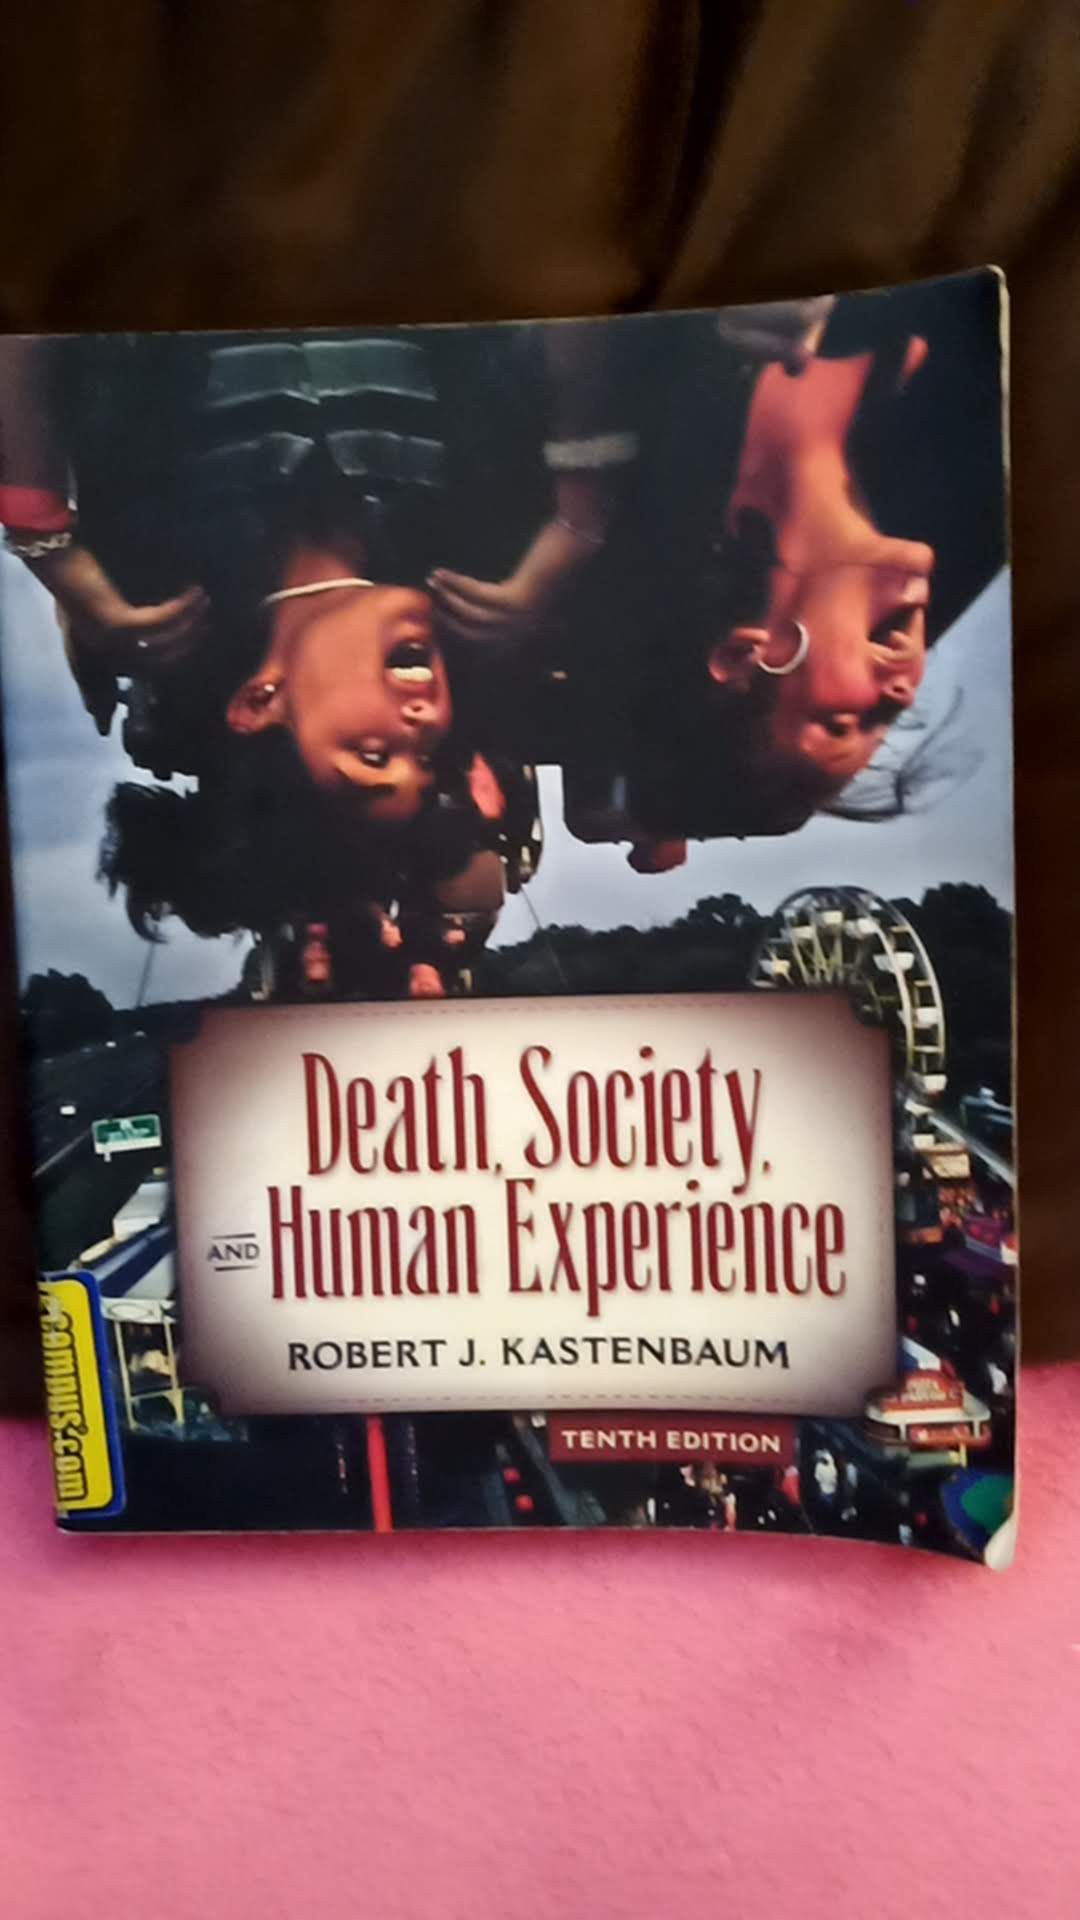 Death, society, and the human experience textbook